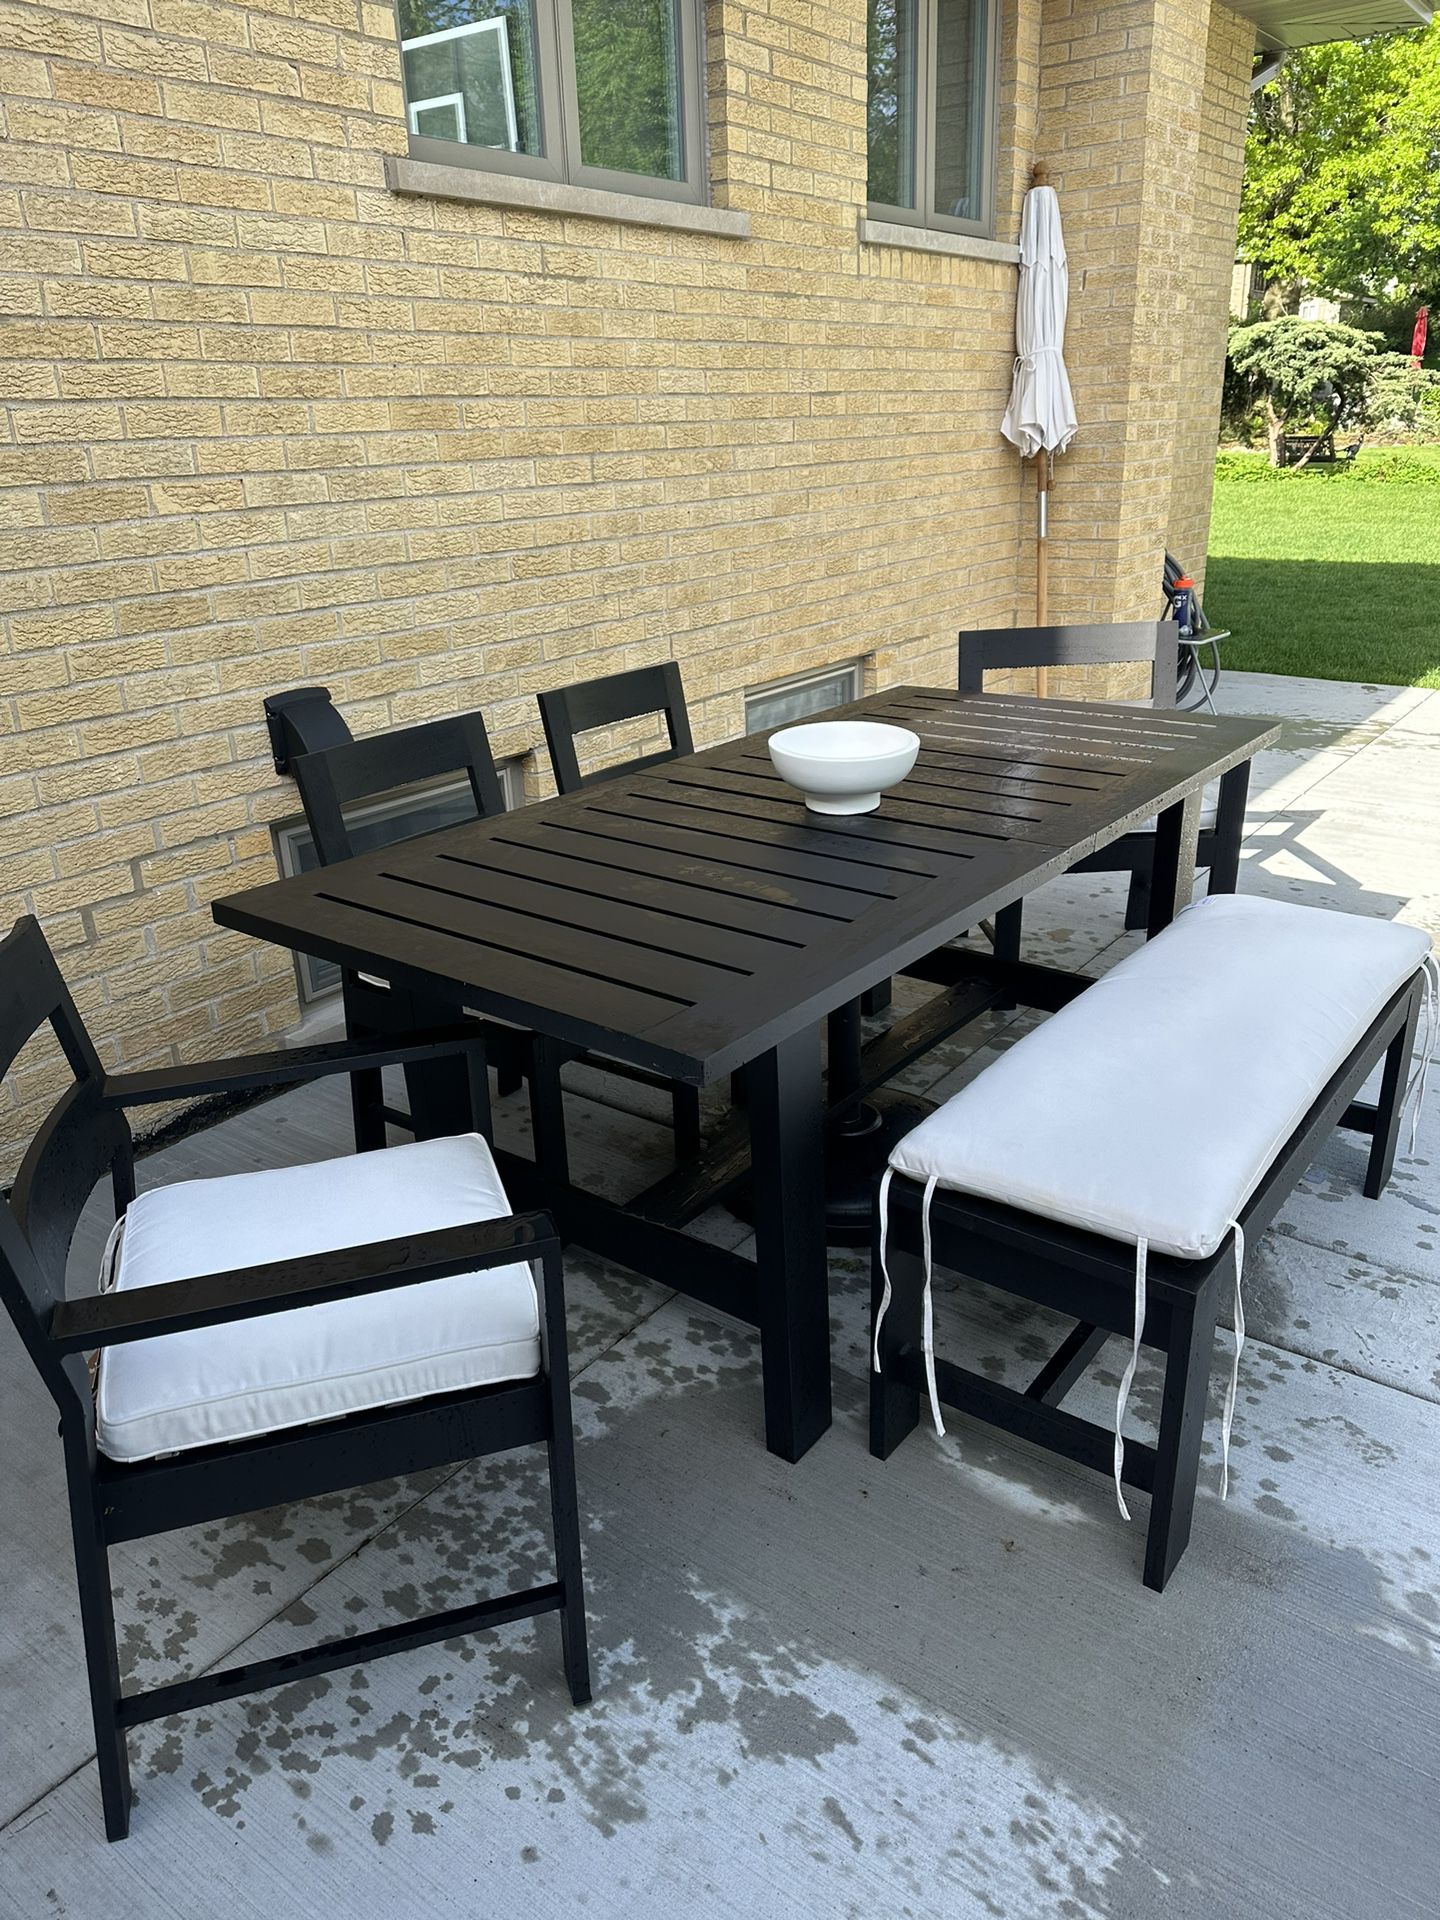 Pottery Barn Malibu Extending Outdoor Table w/4 Chairs, Bench & Cushions